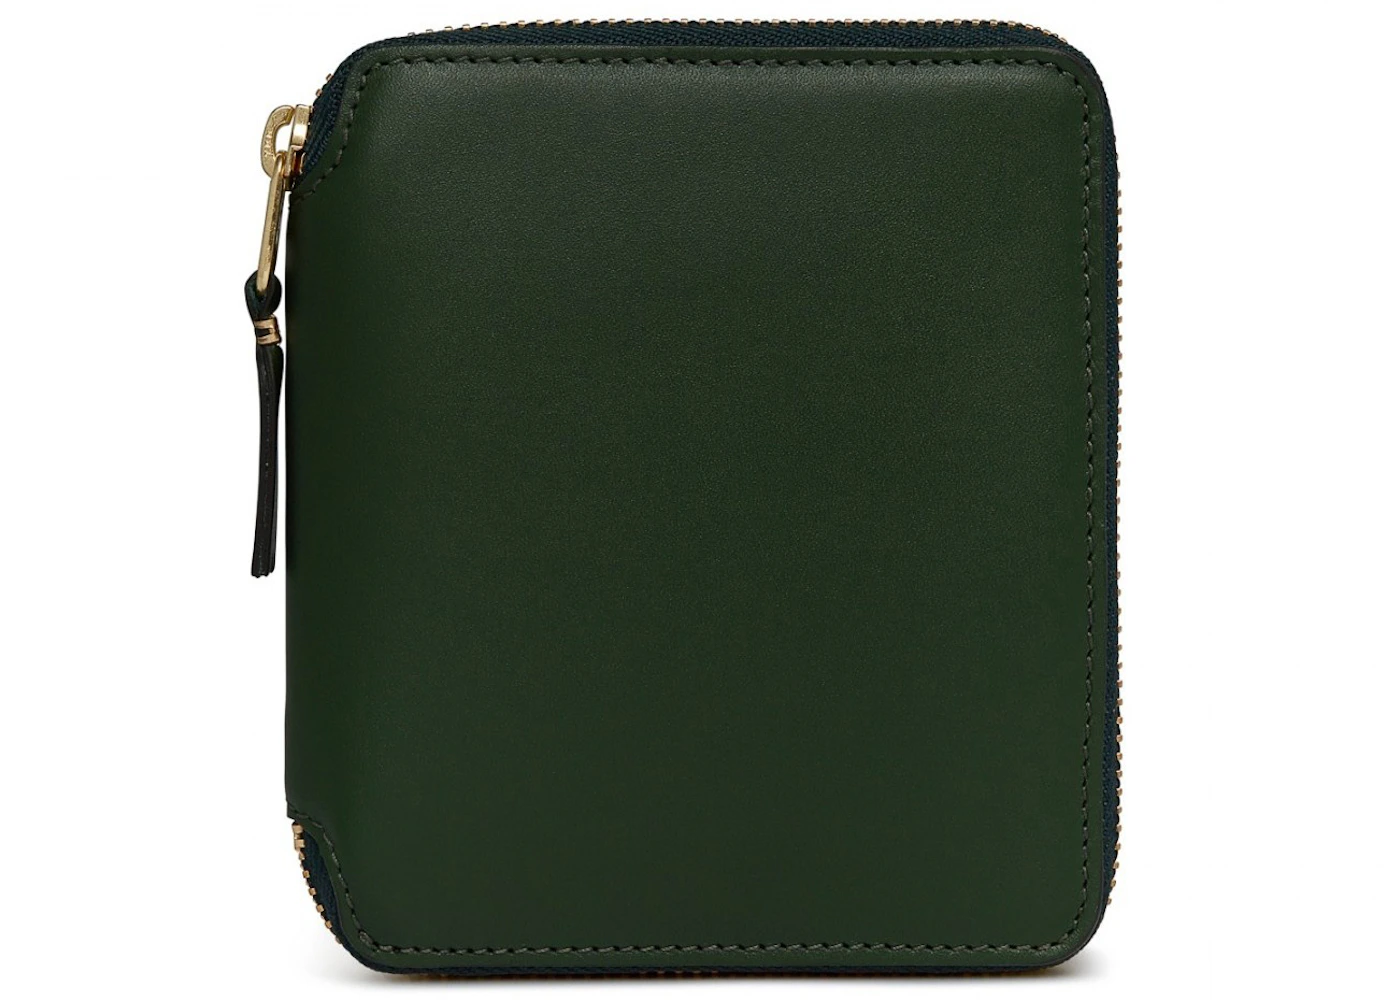 Comme des Garcons SA2100 Classic Wallet Bottle Green in Leather with ...